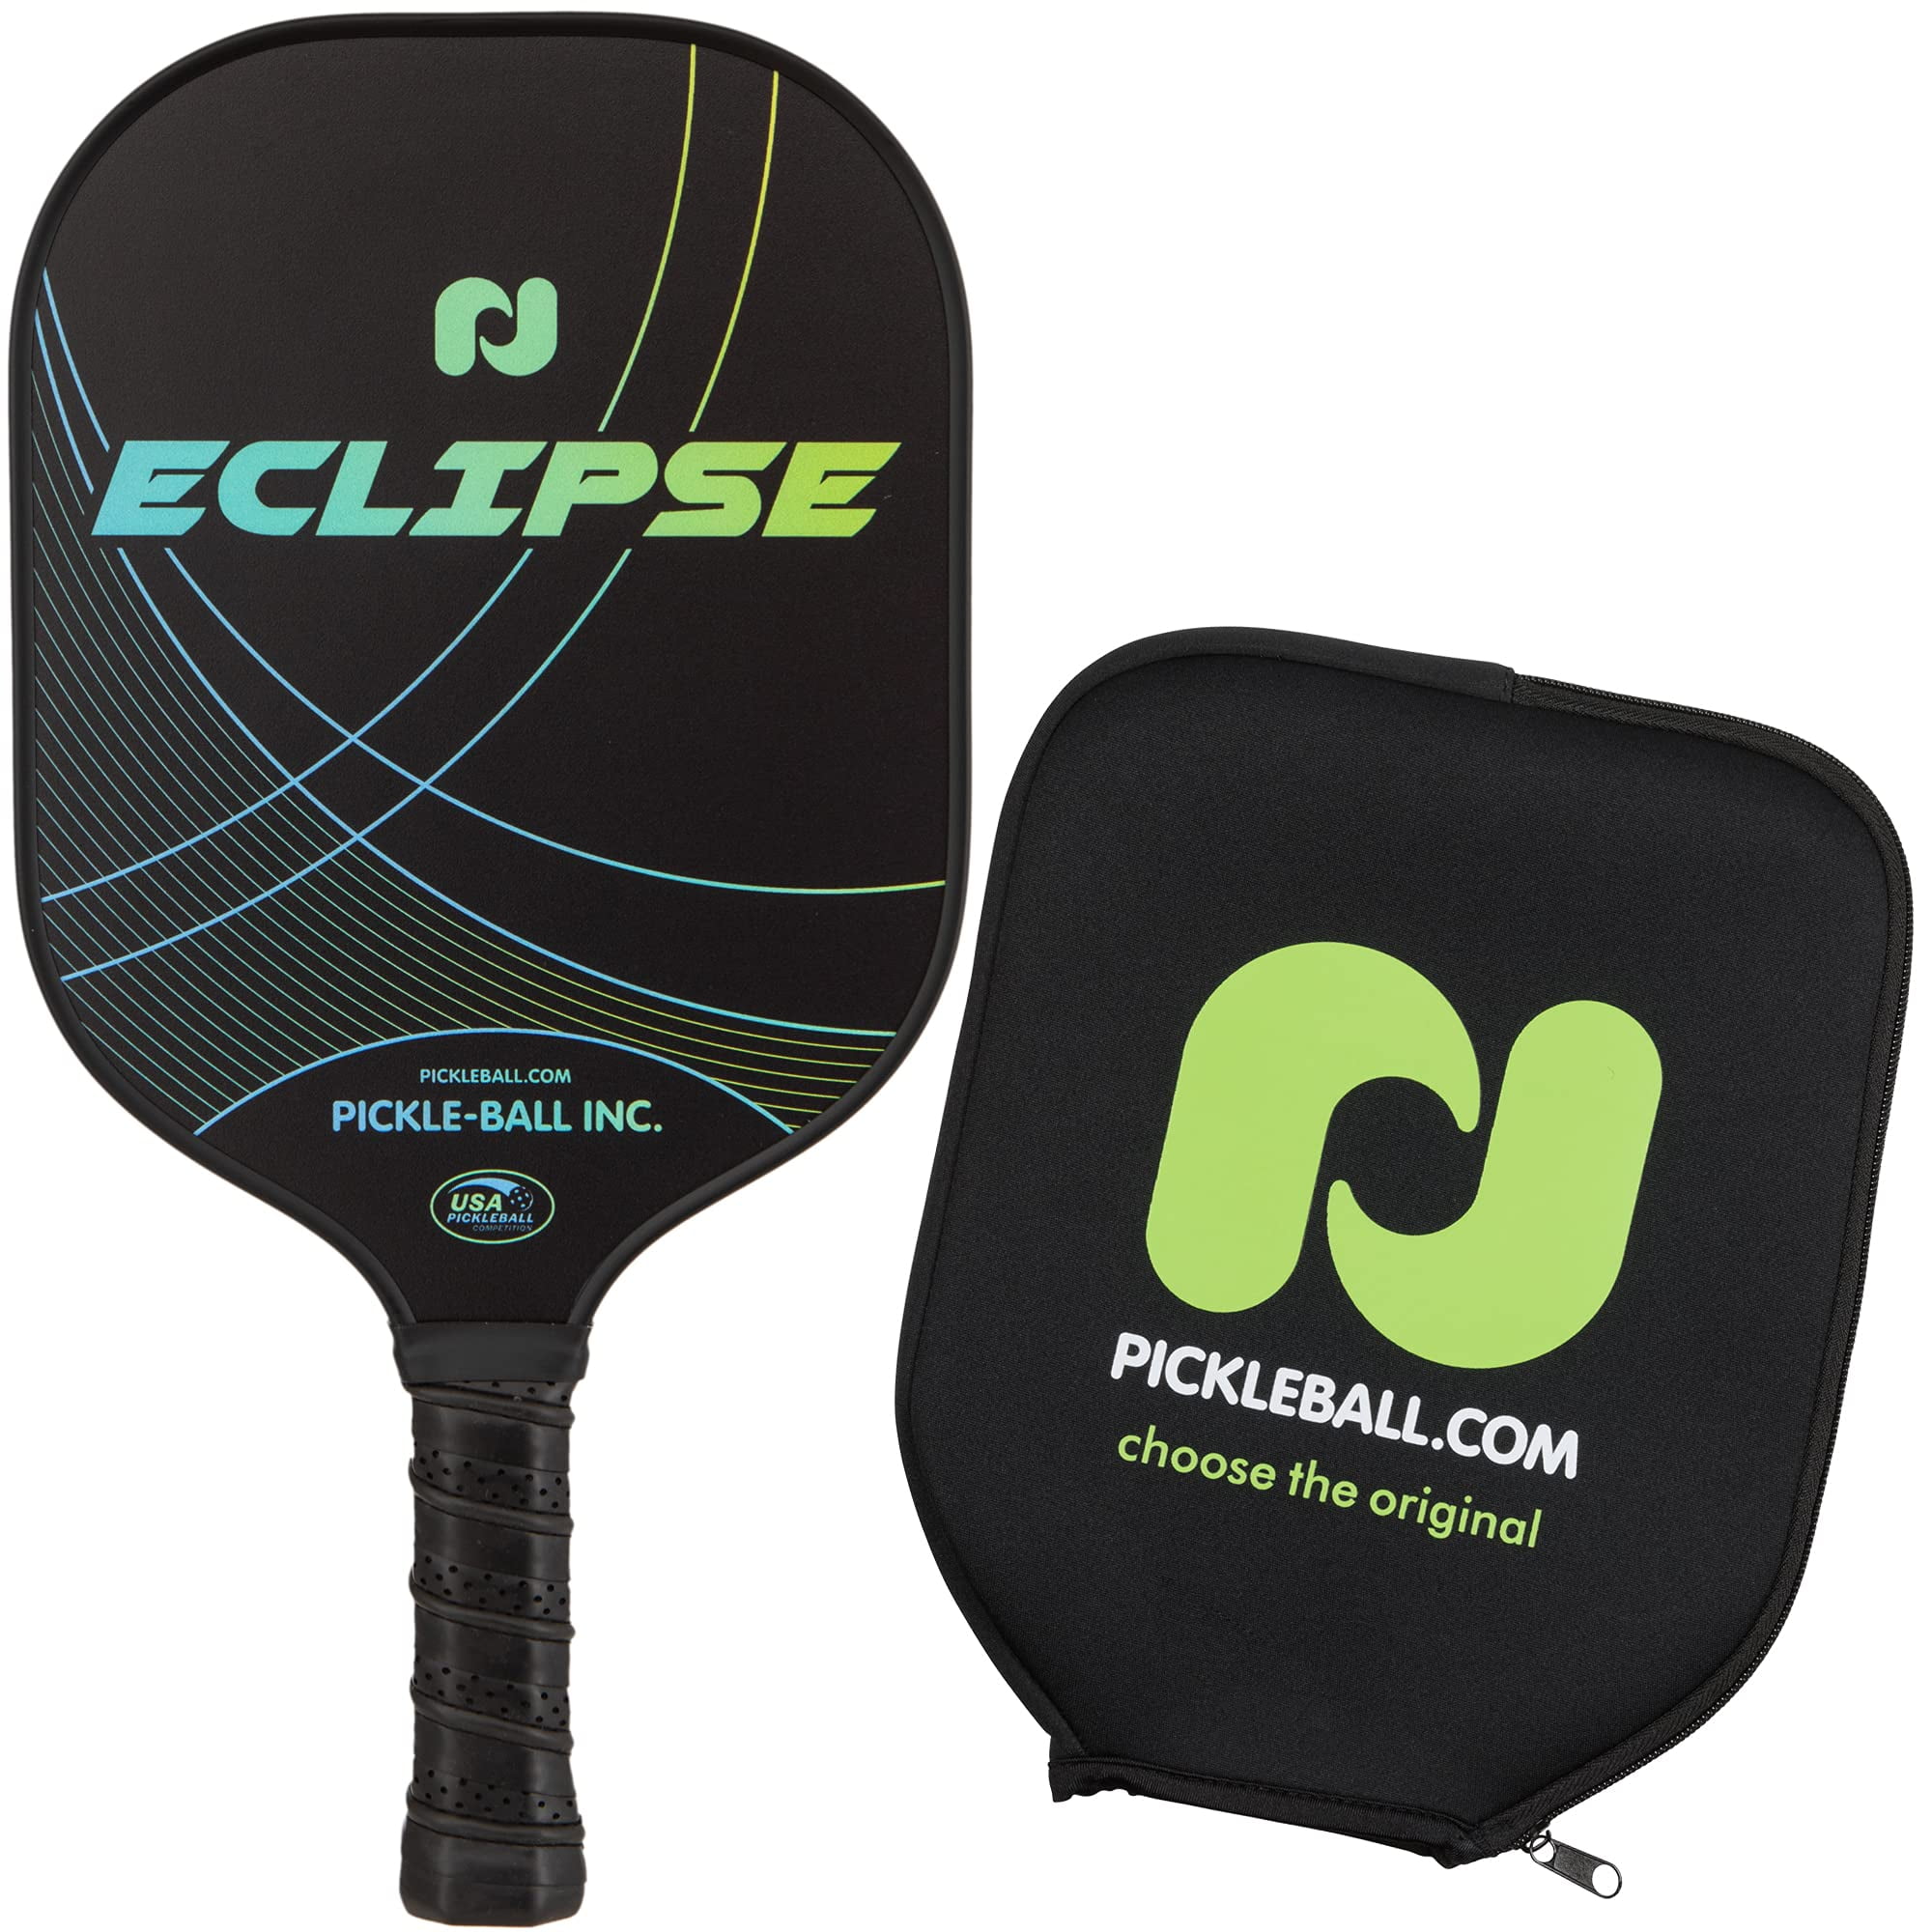 USAPA Approved PickleBall Paddle Graphite Racket Honeycomb Core USA with Cover 